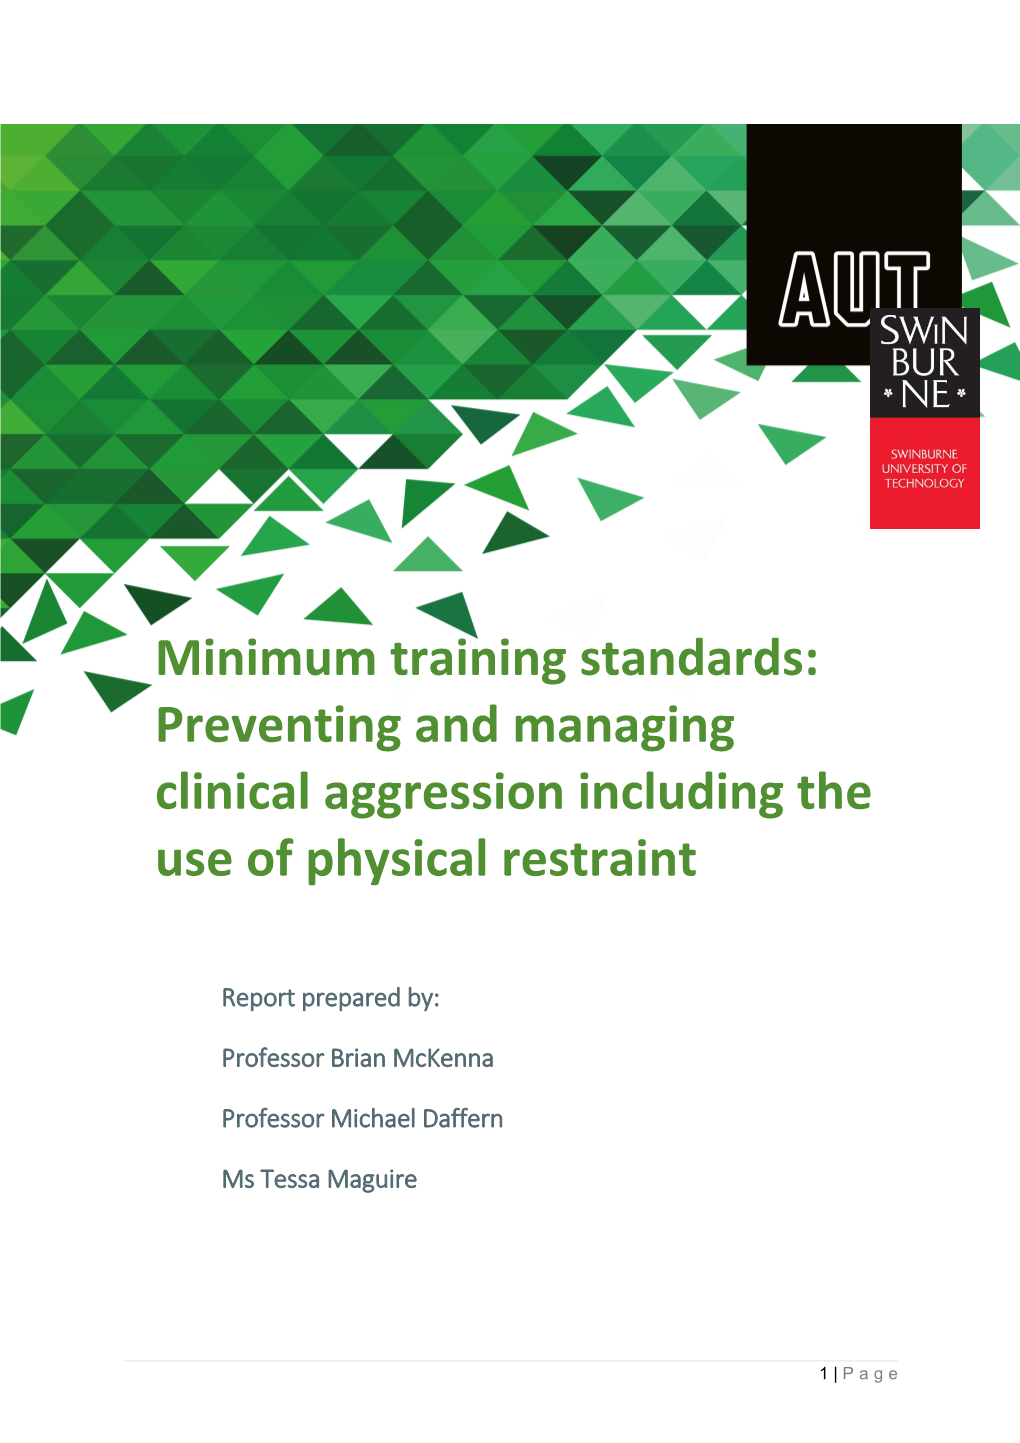 Minimum Training Standards:Preventing and Managing Clinical Aggressionincluding the Use